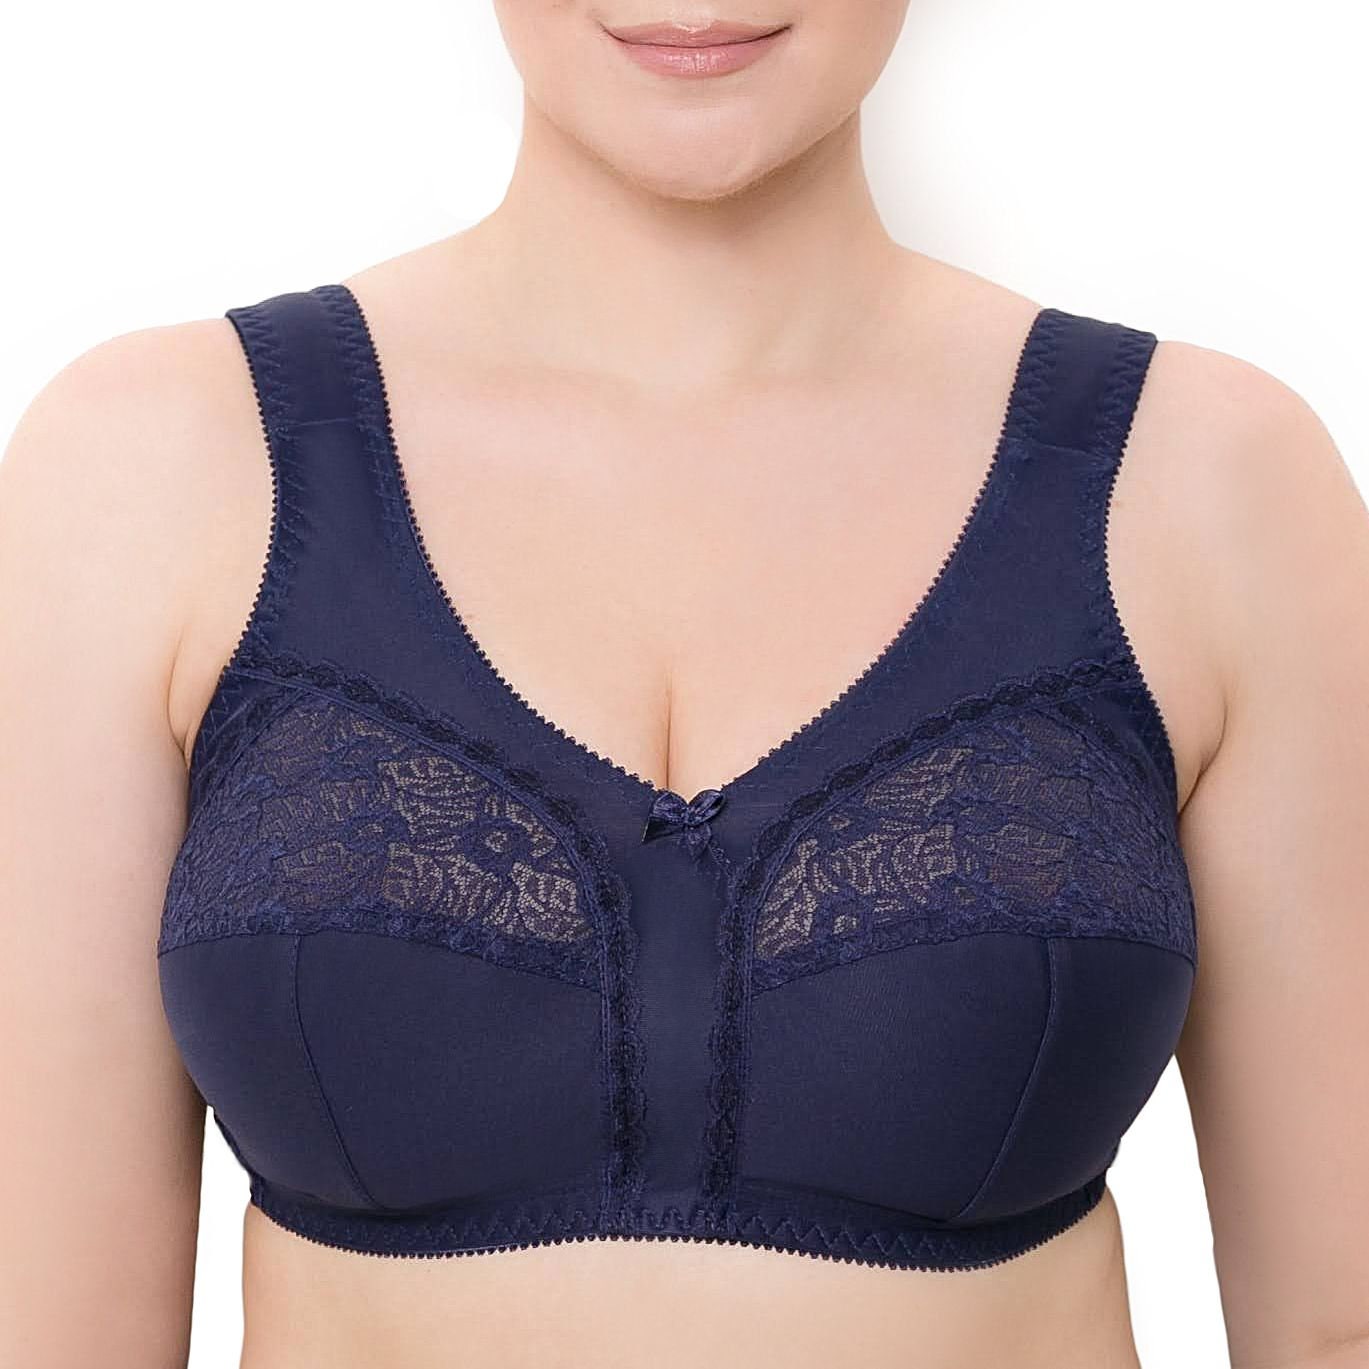 FLORAL LACE BRAS NWT DDD CUP SIZES 36/38/40/42/44 WITH UNDERWIRE